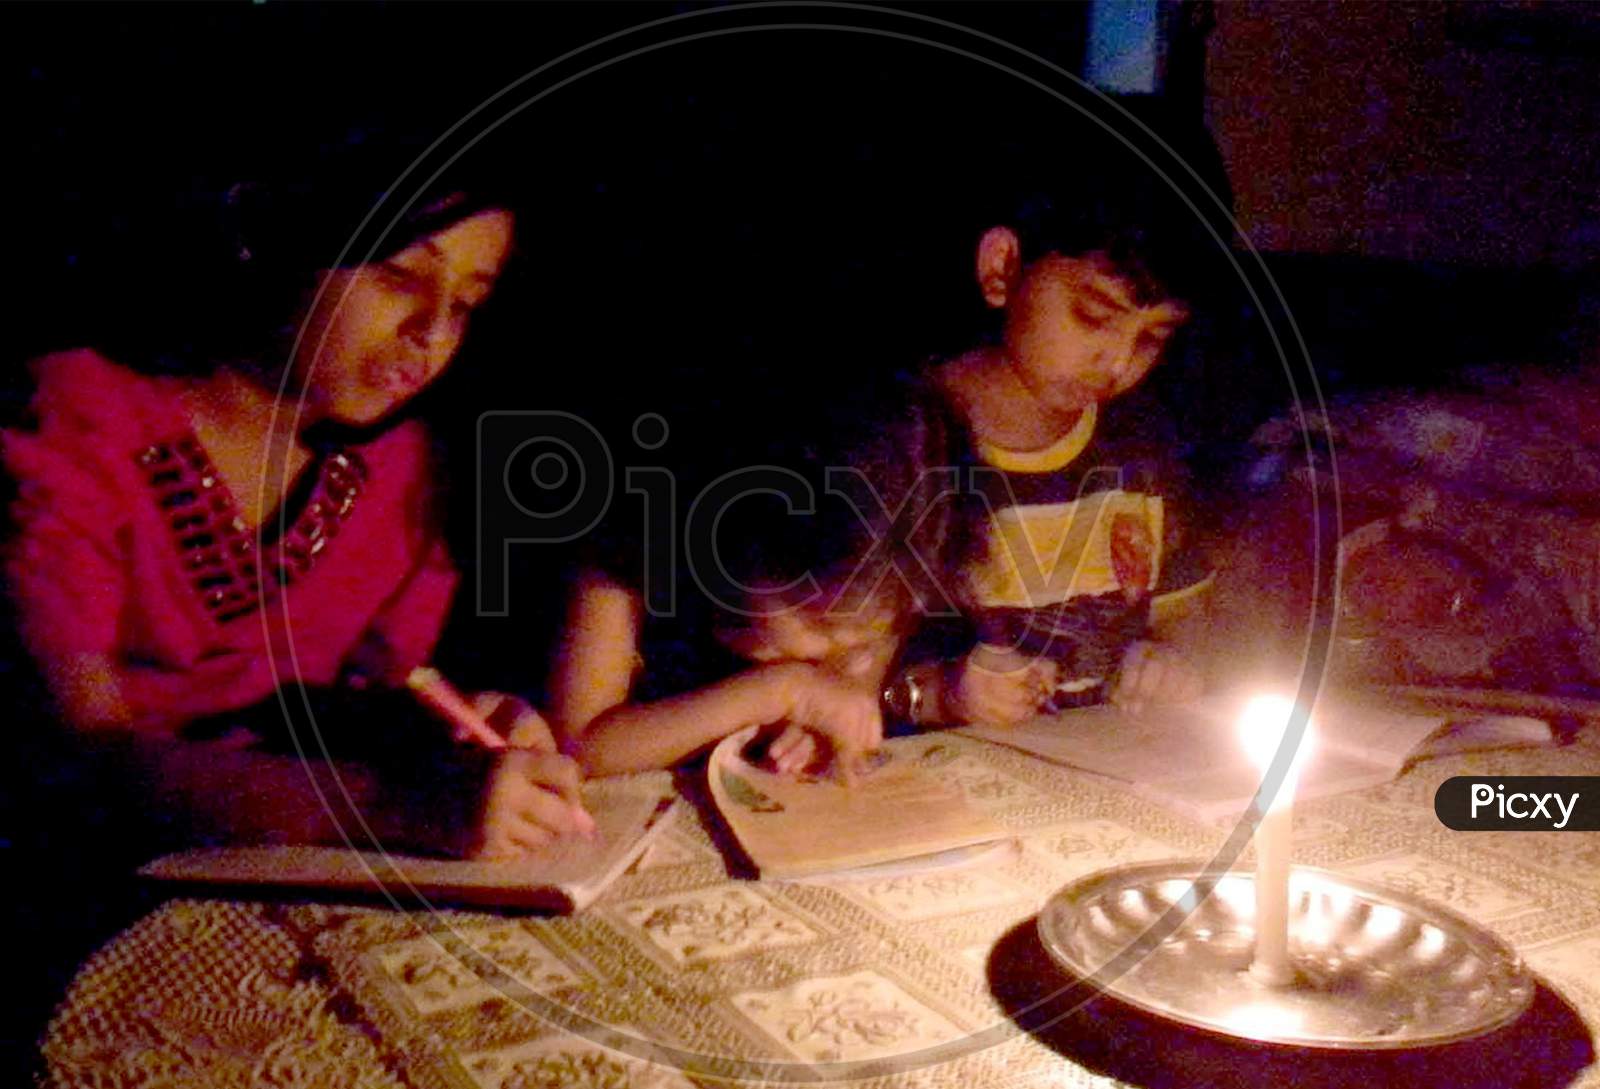 students are busy in study on candle light